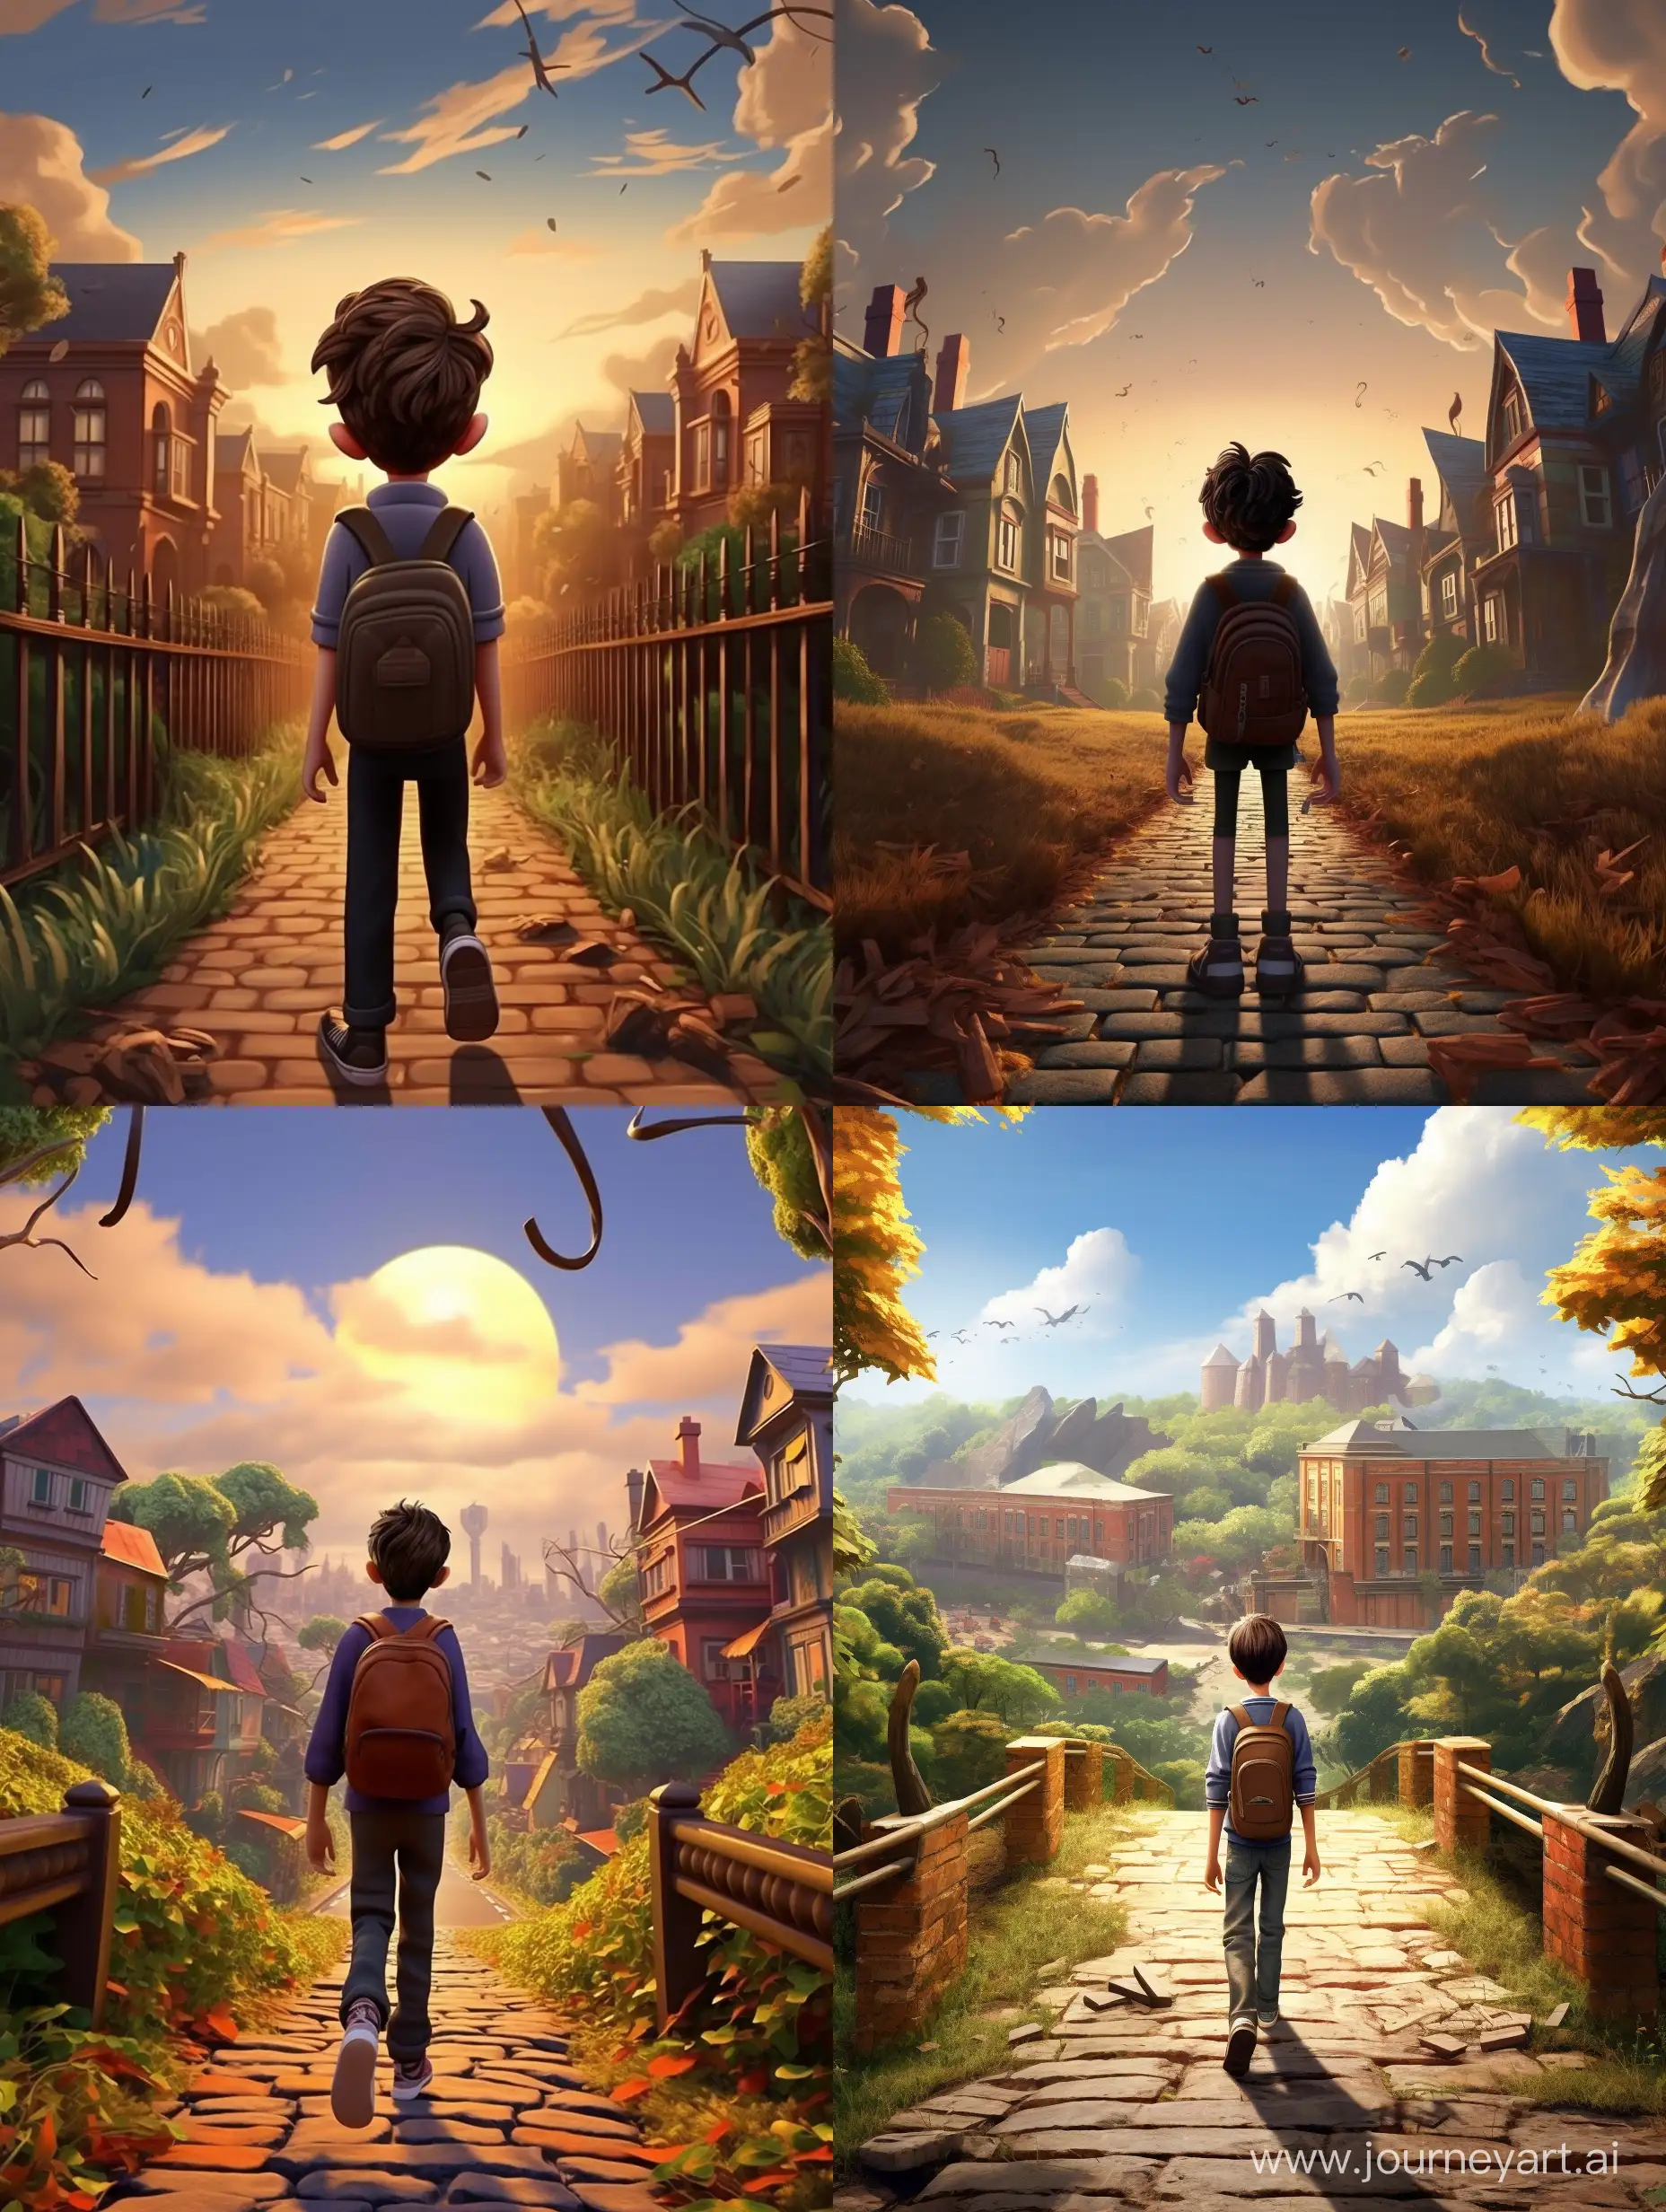 The boy is walking along the path. There is a large school in the background Pixar Style/ 3d animation style